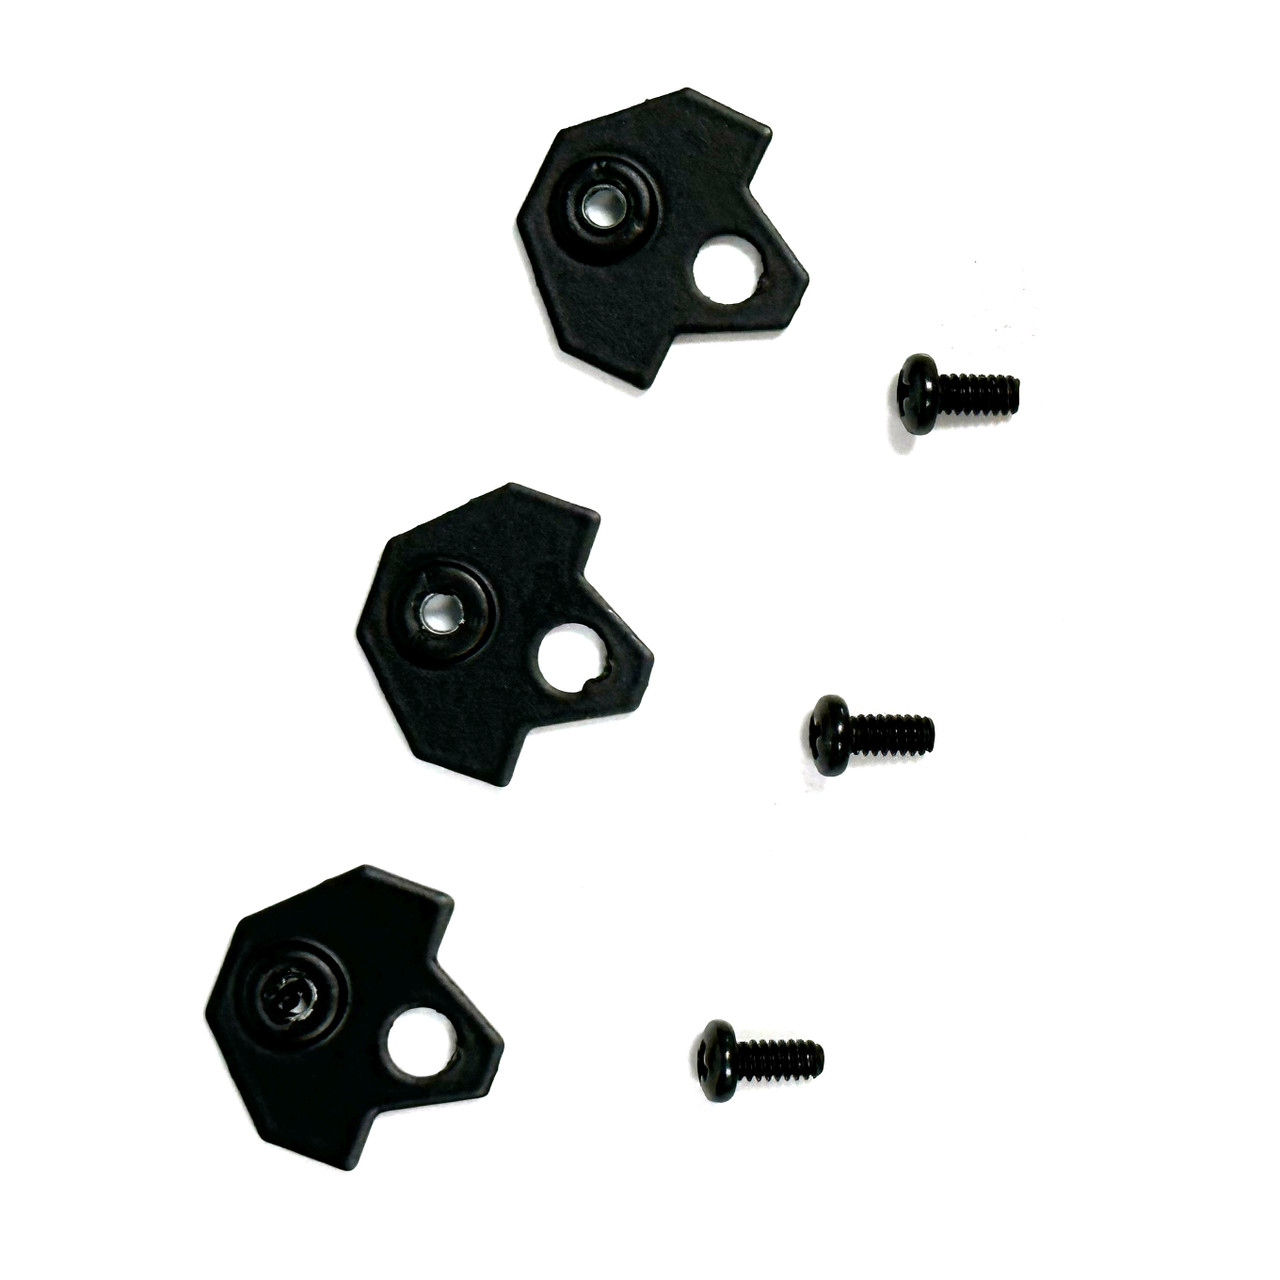 City Theatrical 27880001 MAC Aura PXL Mount Kit, Including 3 Clips and 3 Screws (27880001)